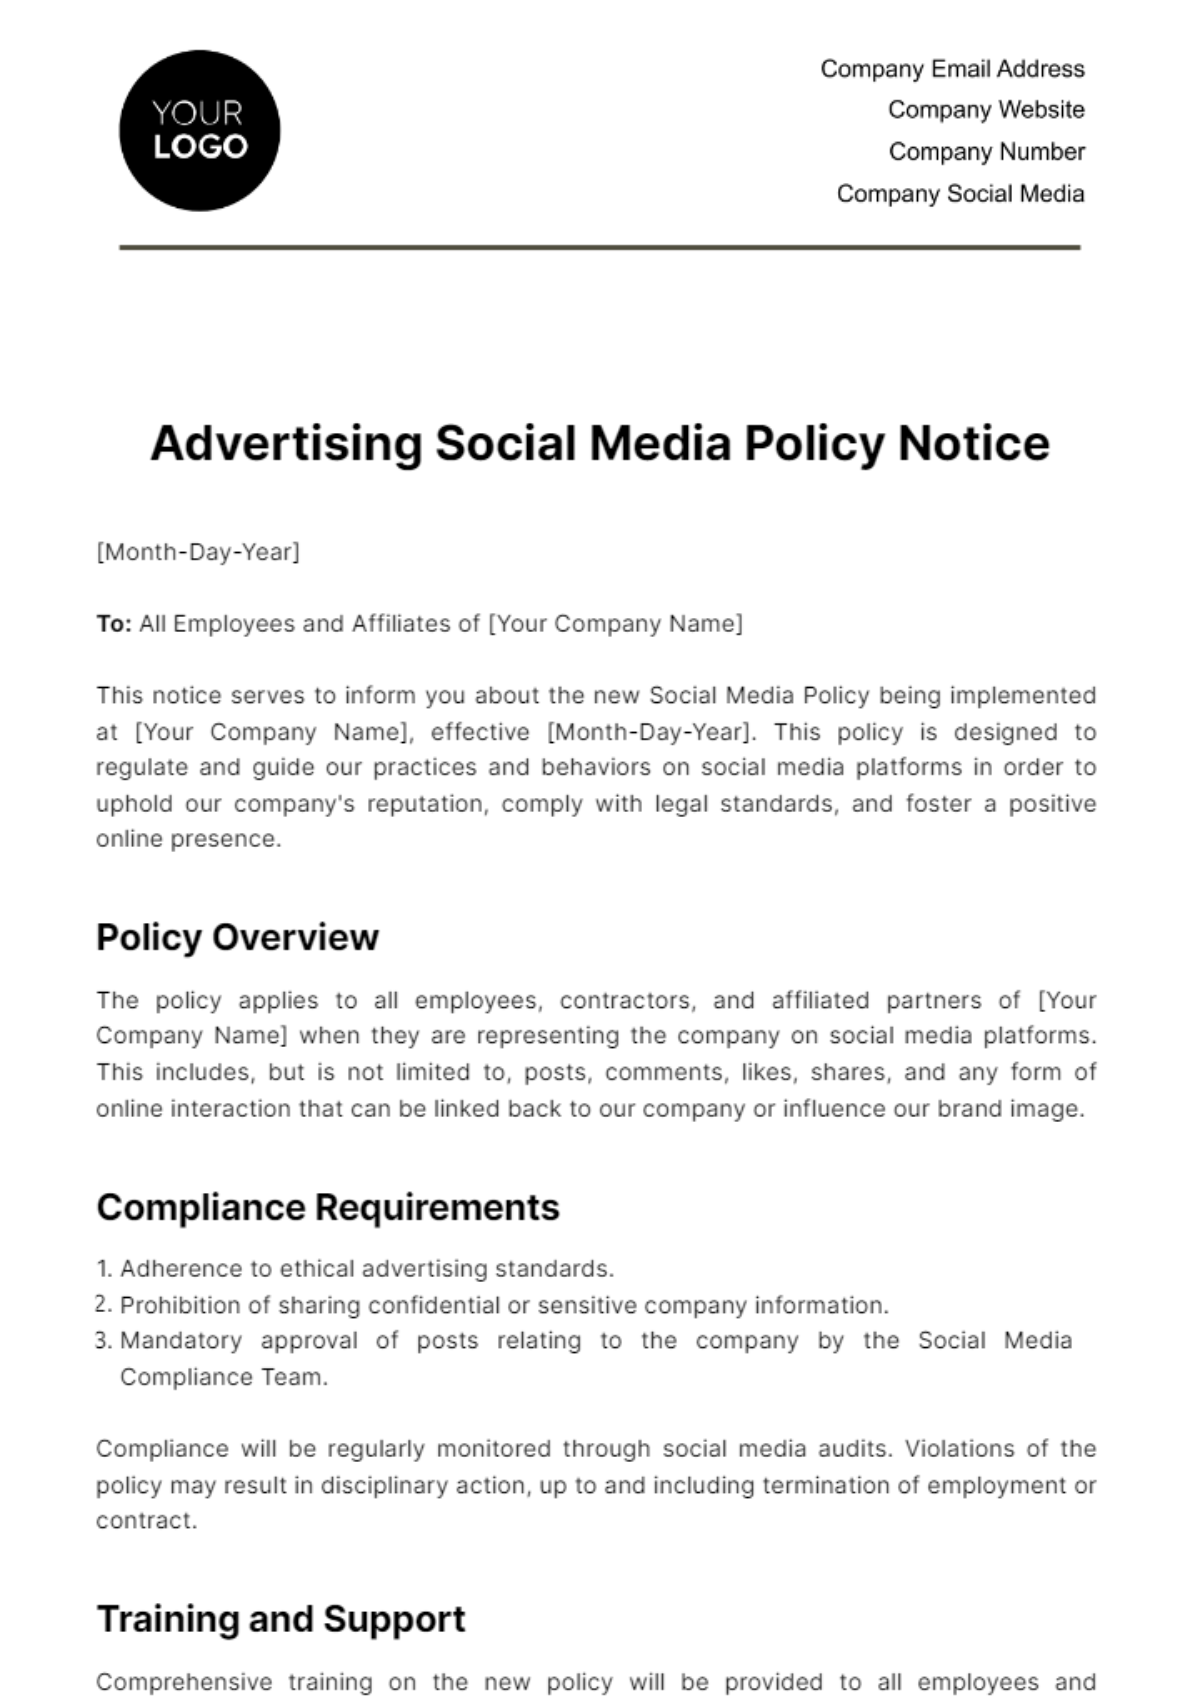 Advertising Social Media Policy Notice Template